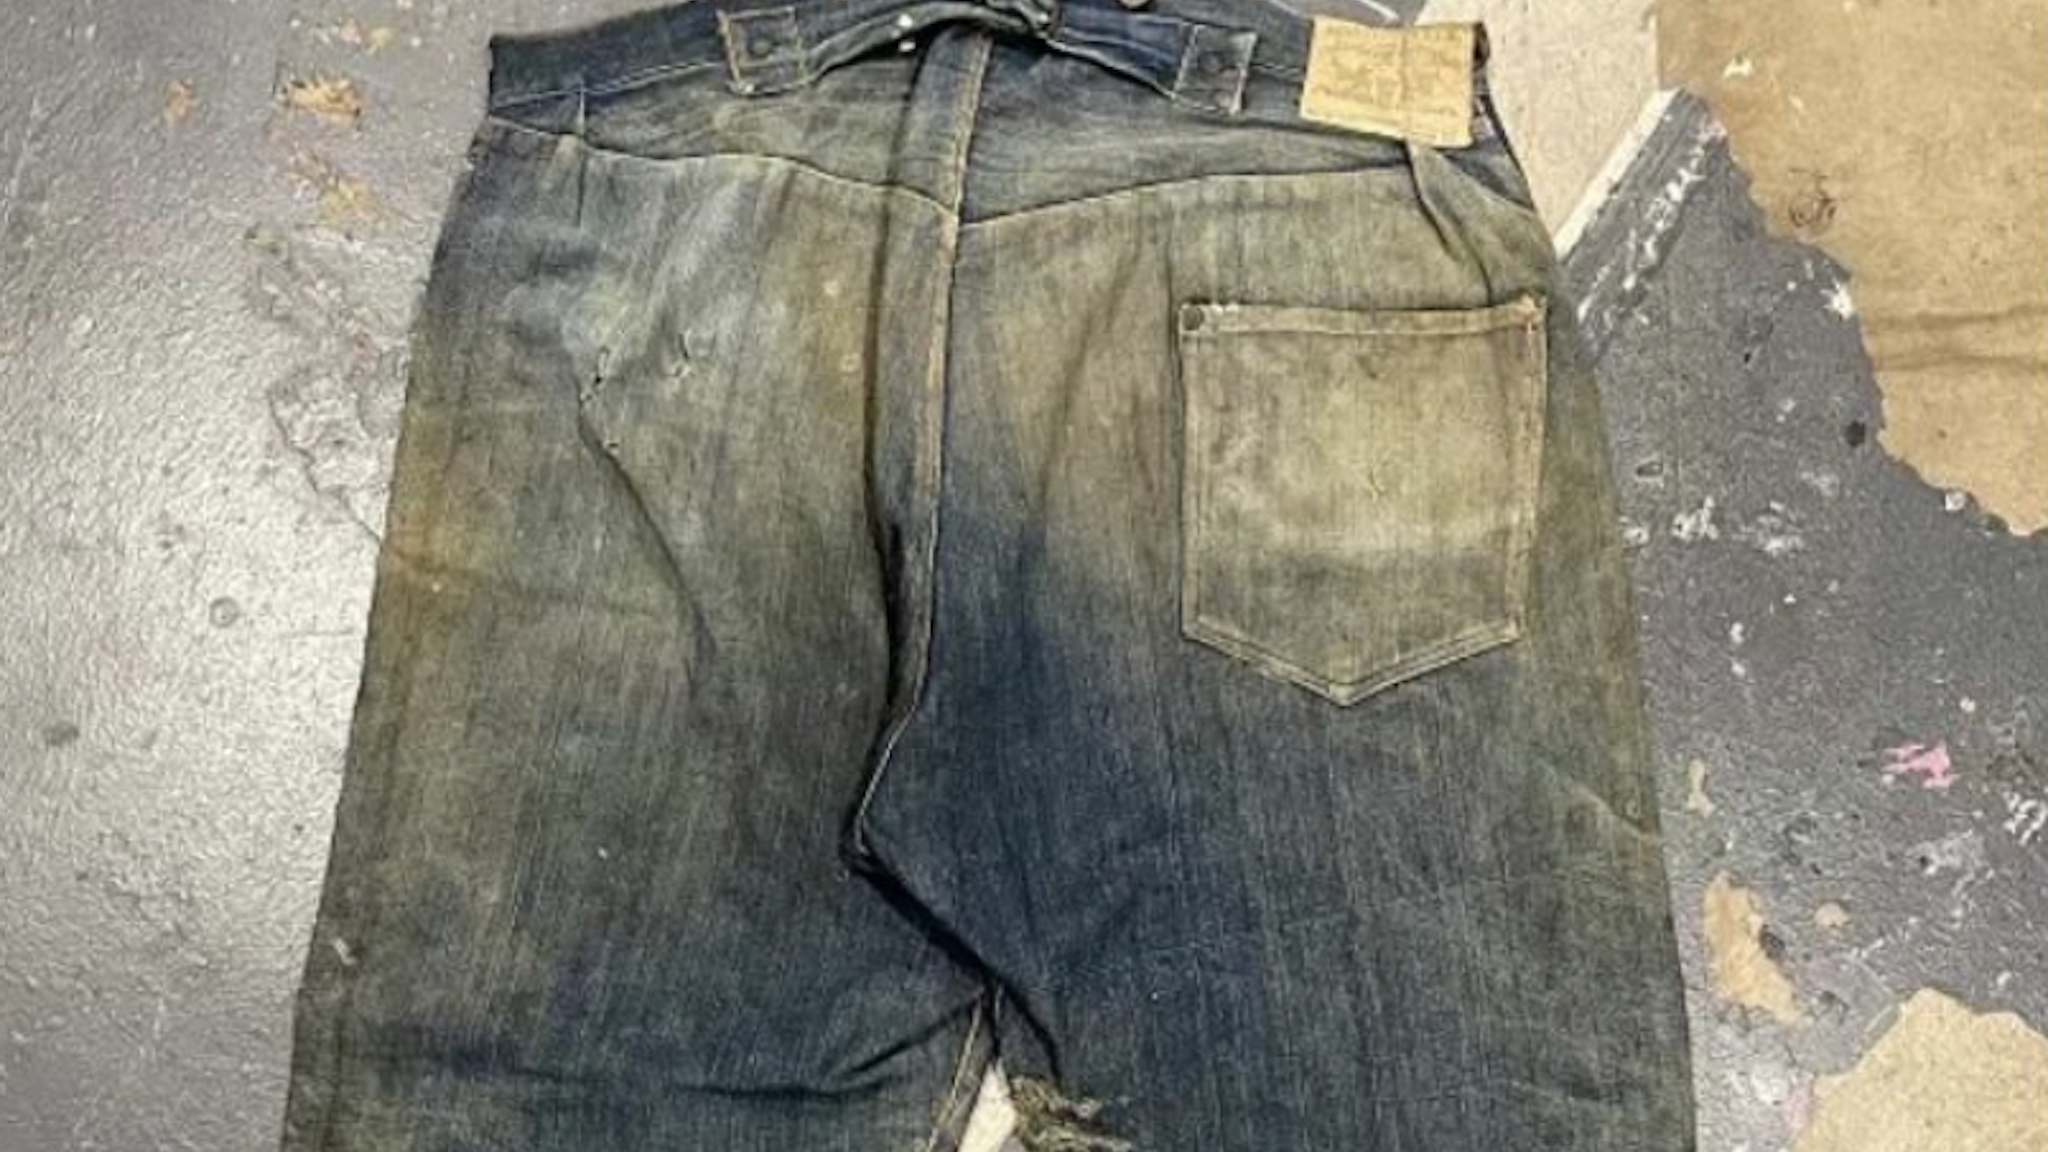 The blue jeans, from the 1880s, were found by self-described “denim historian” Michael Harris in the mine, The Wall Street Journal reported. They may have been worn by a Gold Rush prospector, and are considered the “holy grail of vintage denim collecting.”